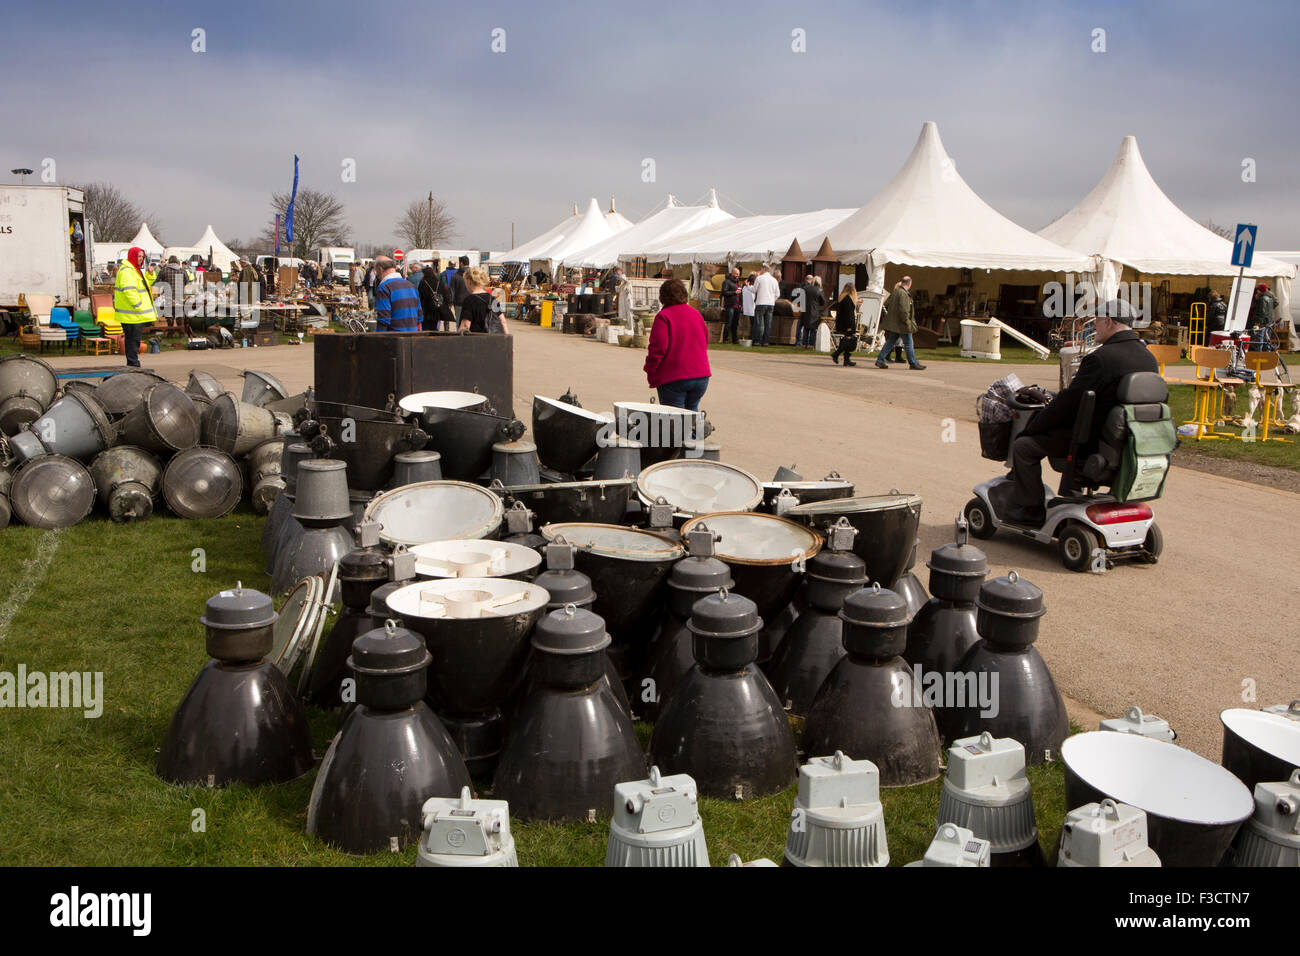 UK, England, Lincolnshire, Lincoln, Antiques Fair, old industrial lighting on sale Stock Photo